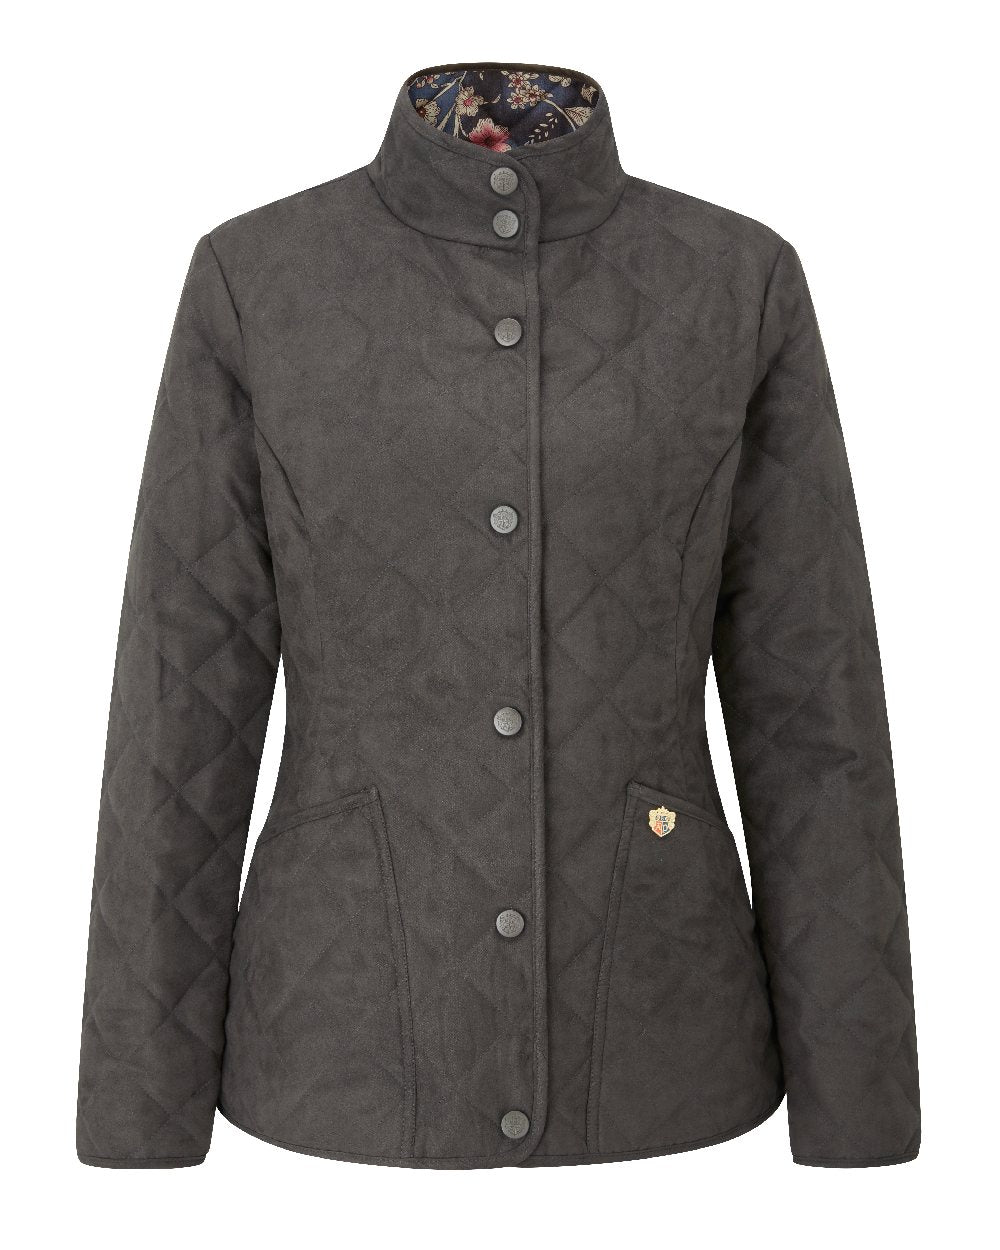 Alan Paine Felwell Womens Jacket in Olive 